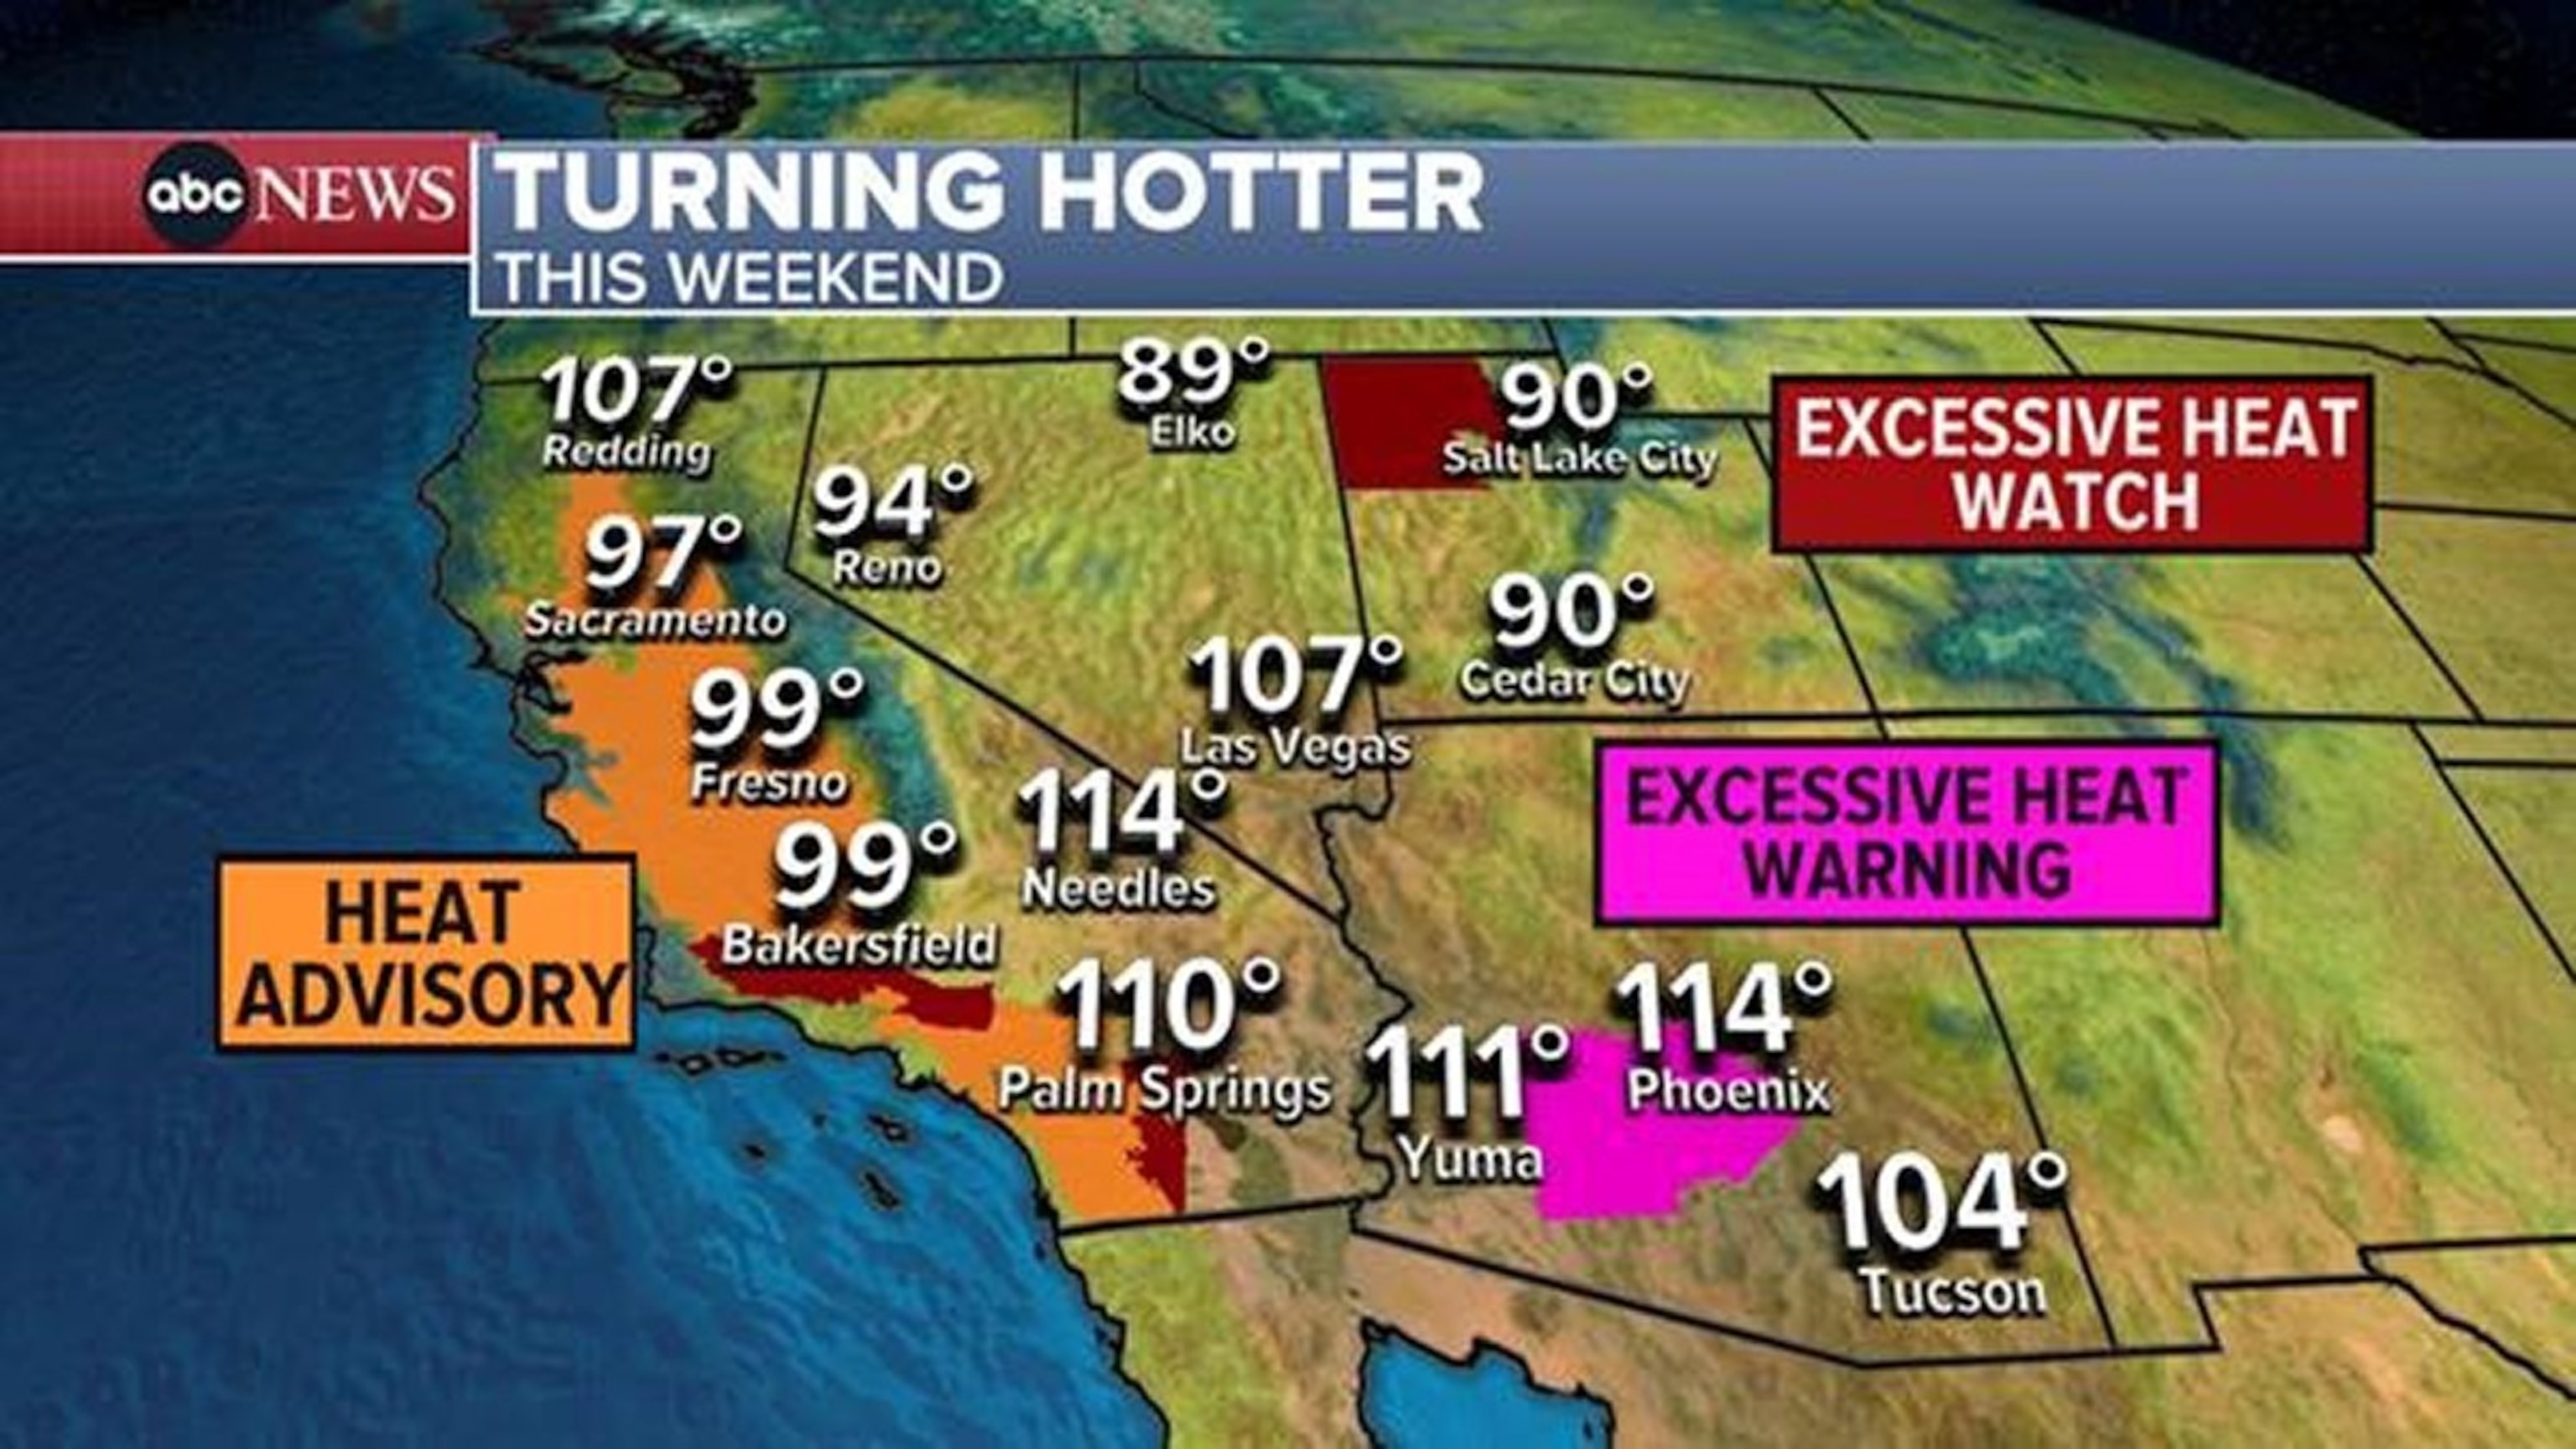 PHOTO: Turning hotter this weekend.